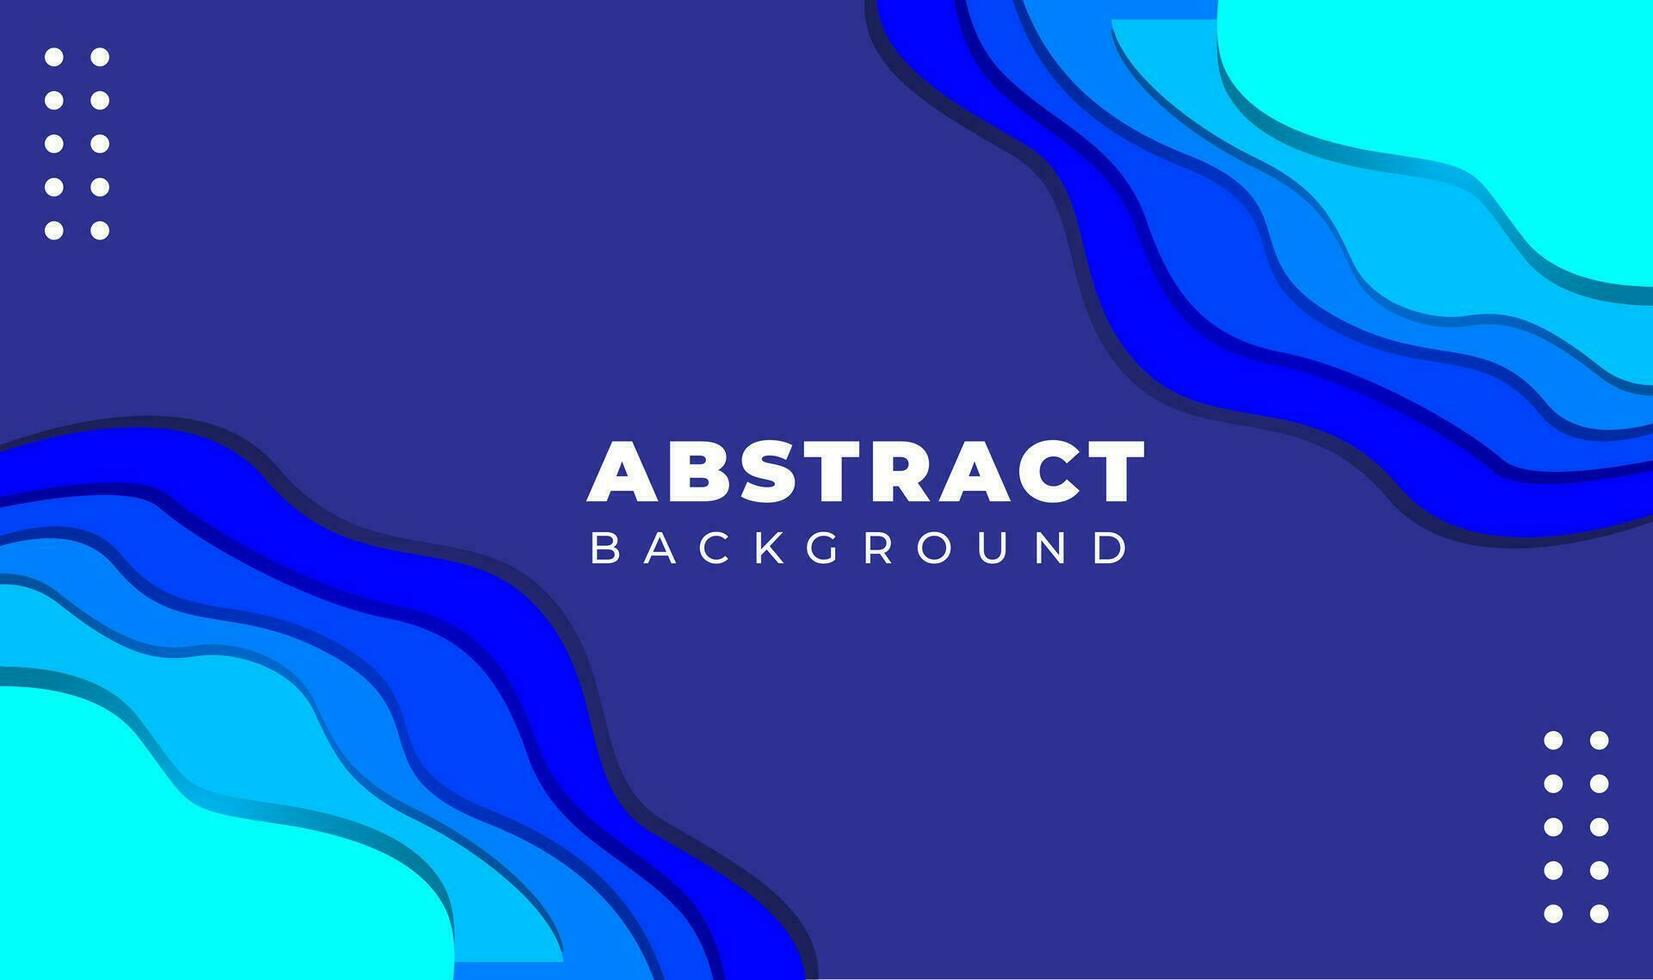 abstract background and paper cut shapes. Vector design layout for business presentations, flyers, posters and invitations